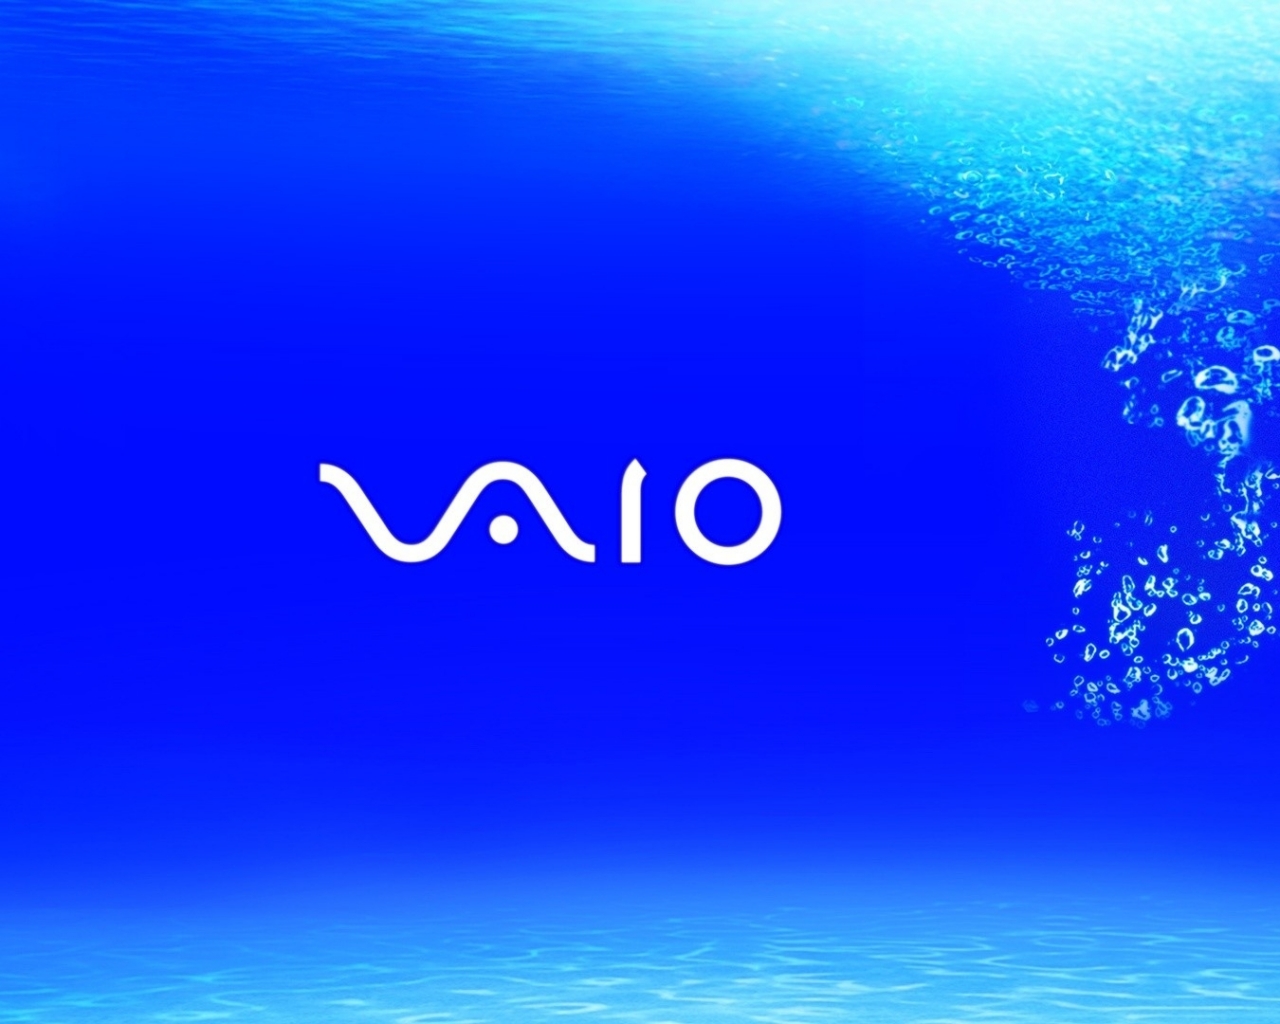 Sony Vaio Wallpaper High Resolution Car Pictures